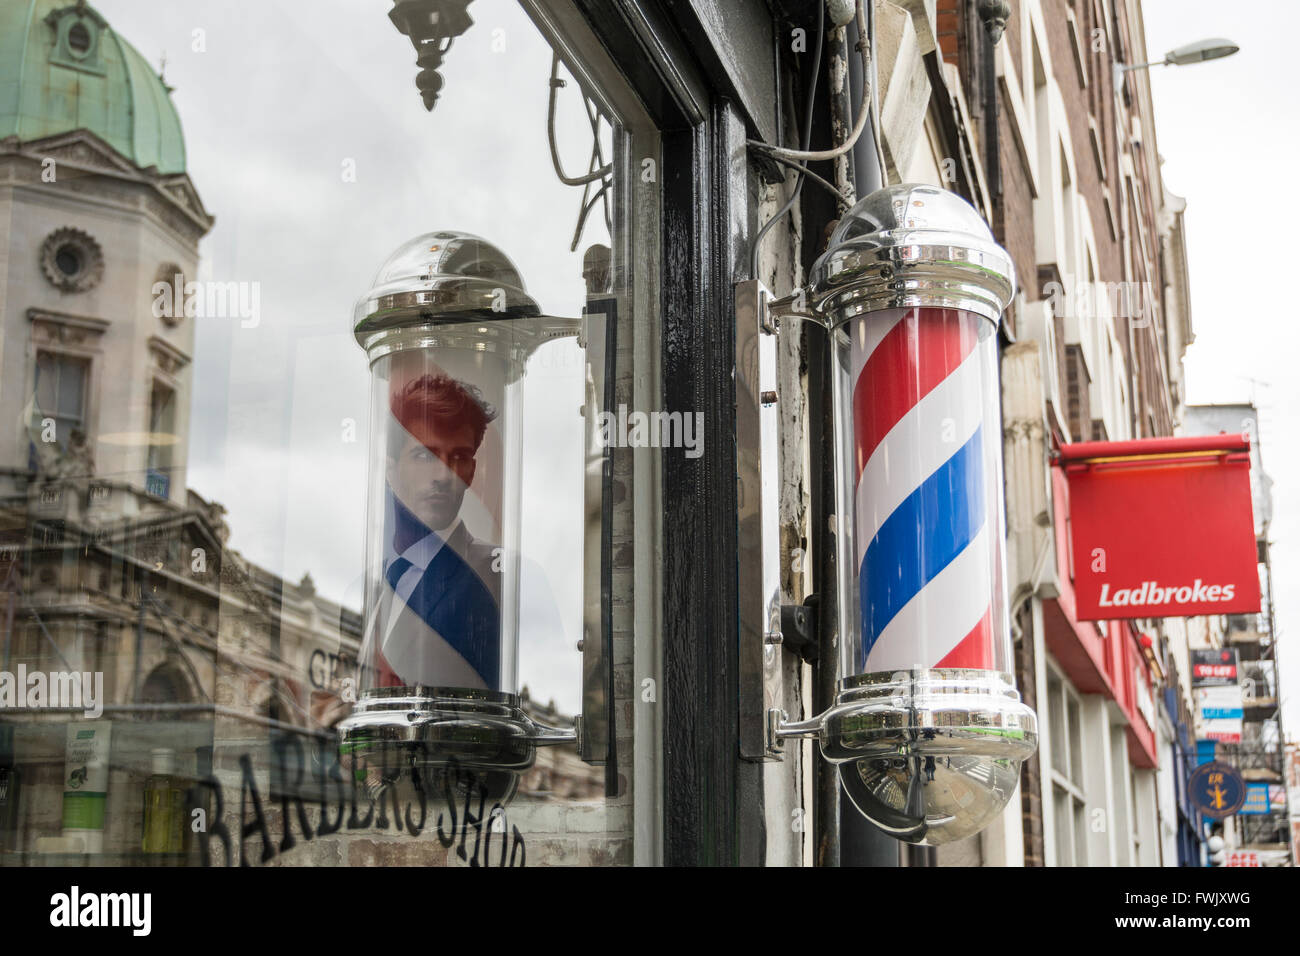 Barbers shops and poles in London's Smithfield area, UK Stock Photo